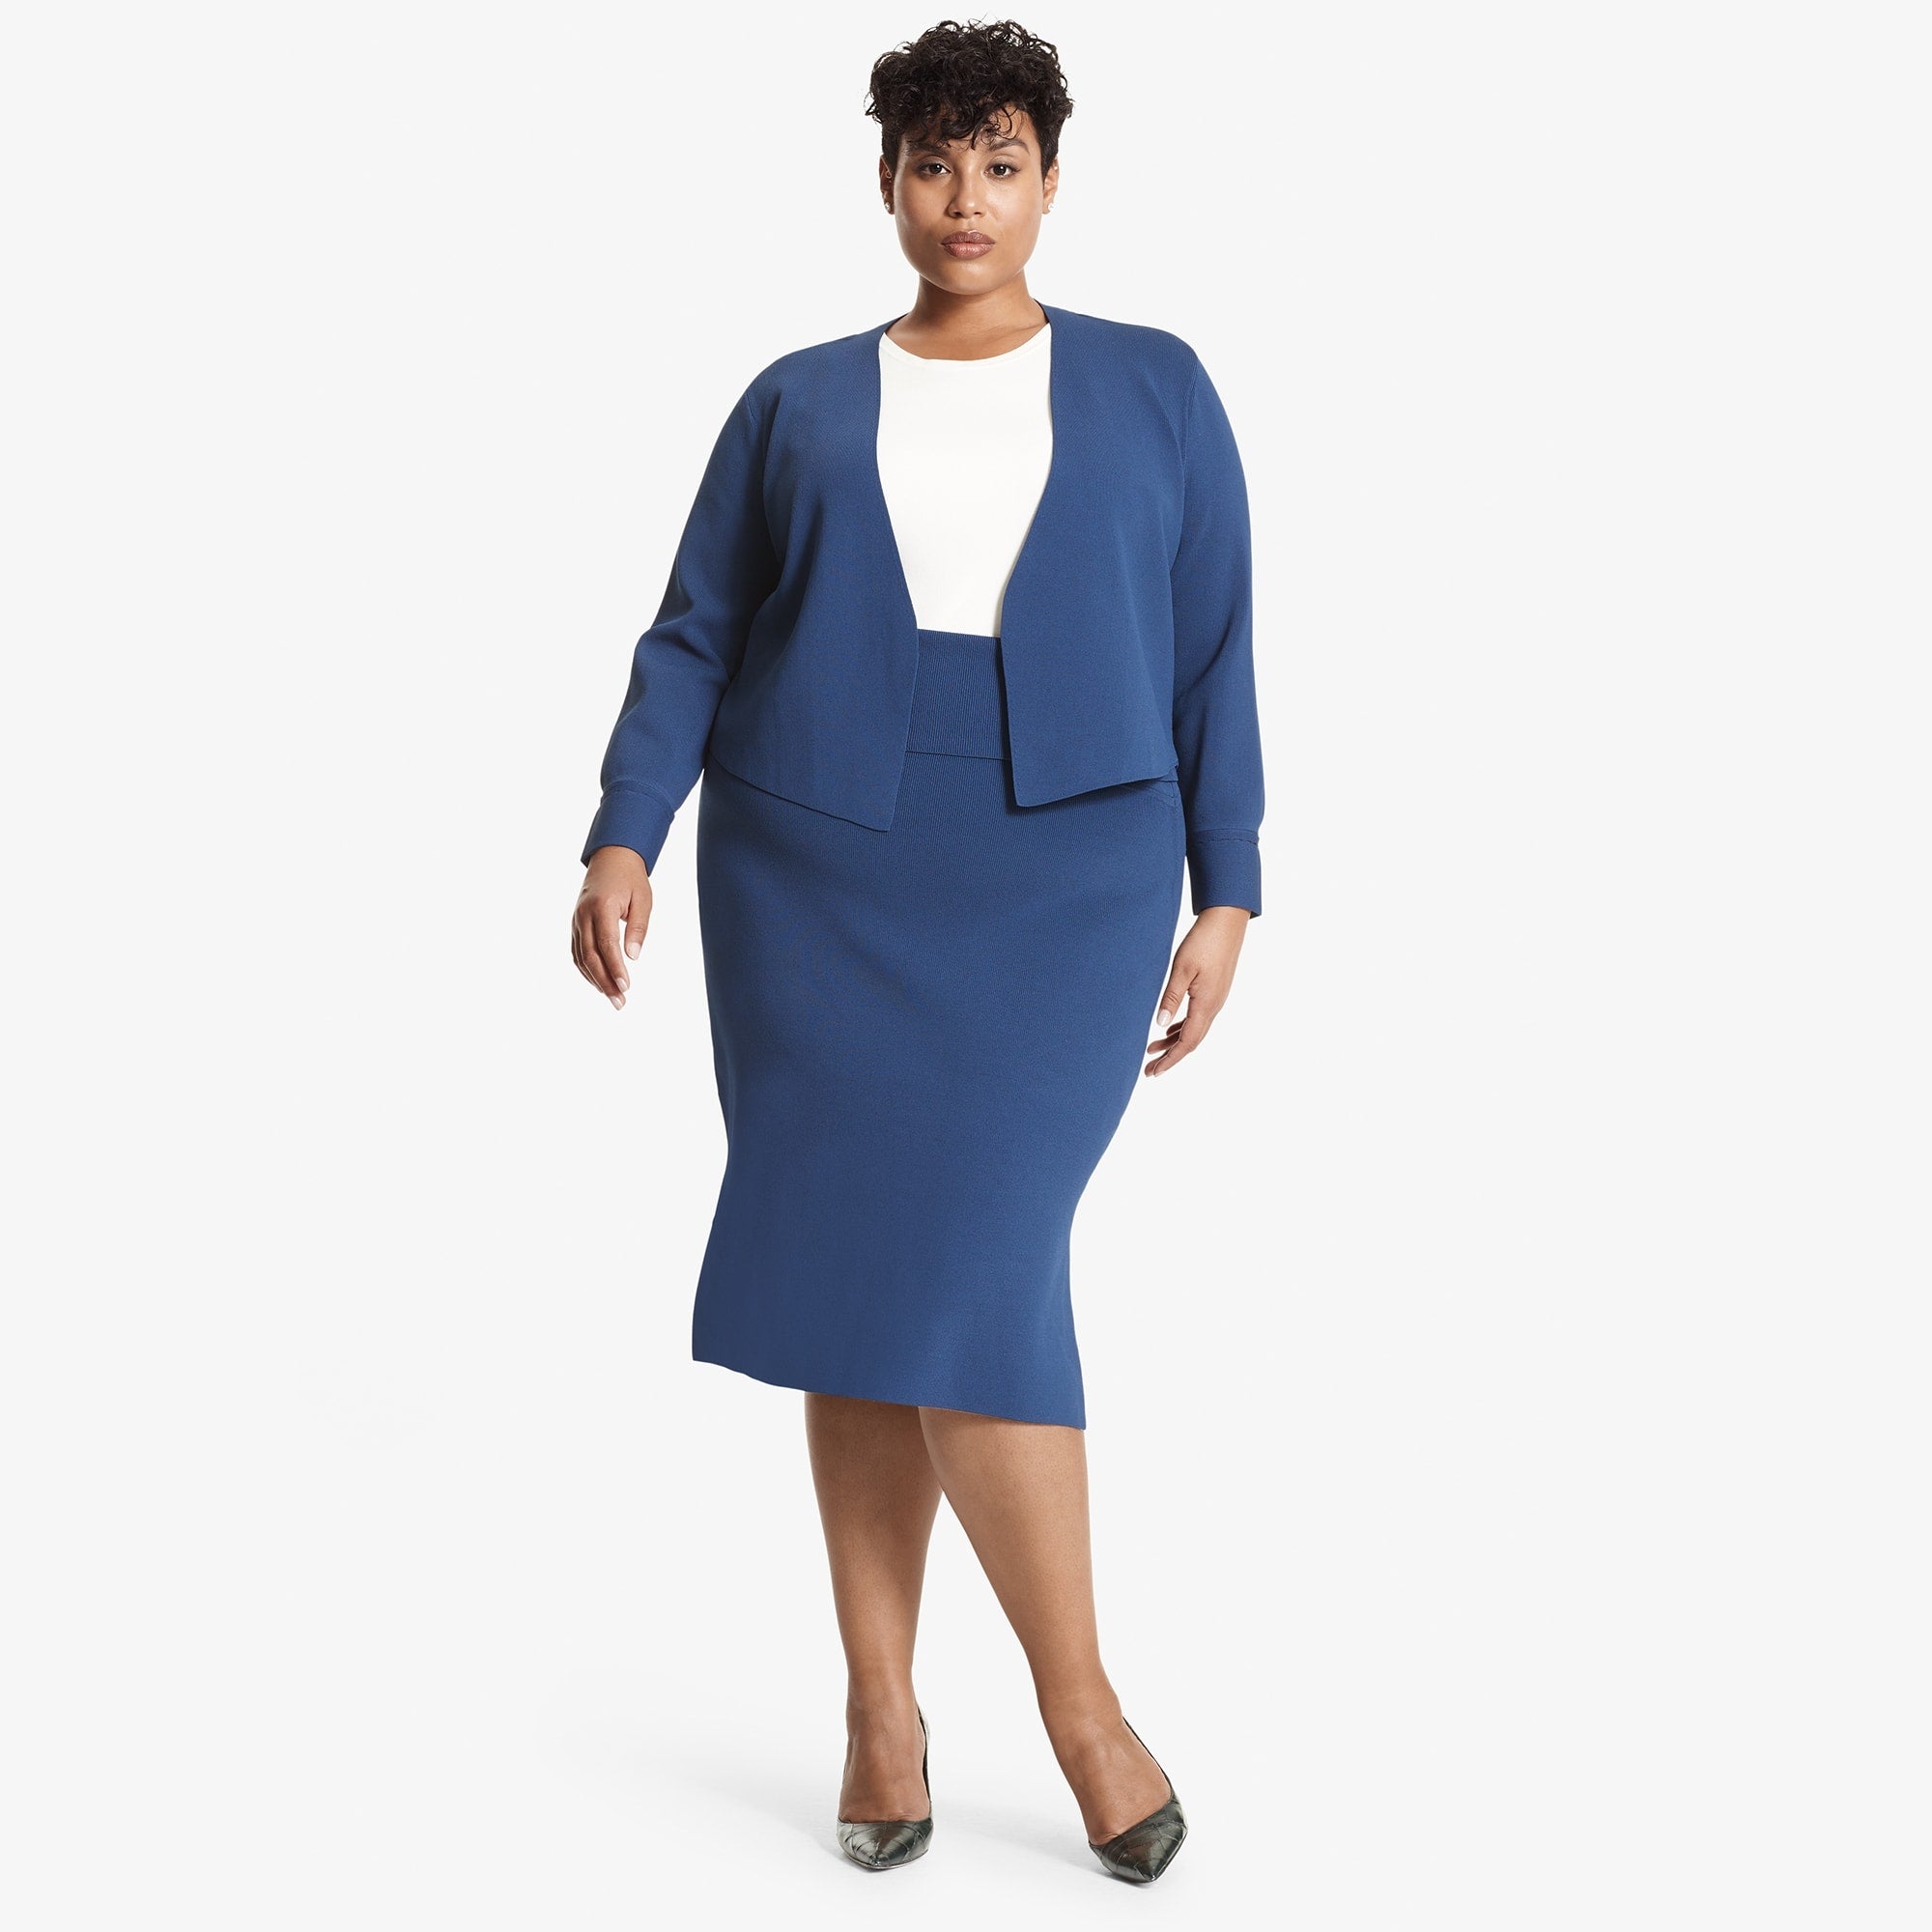 Front image of a woman standing wearing the Harlem skirt in Regent blue